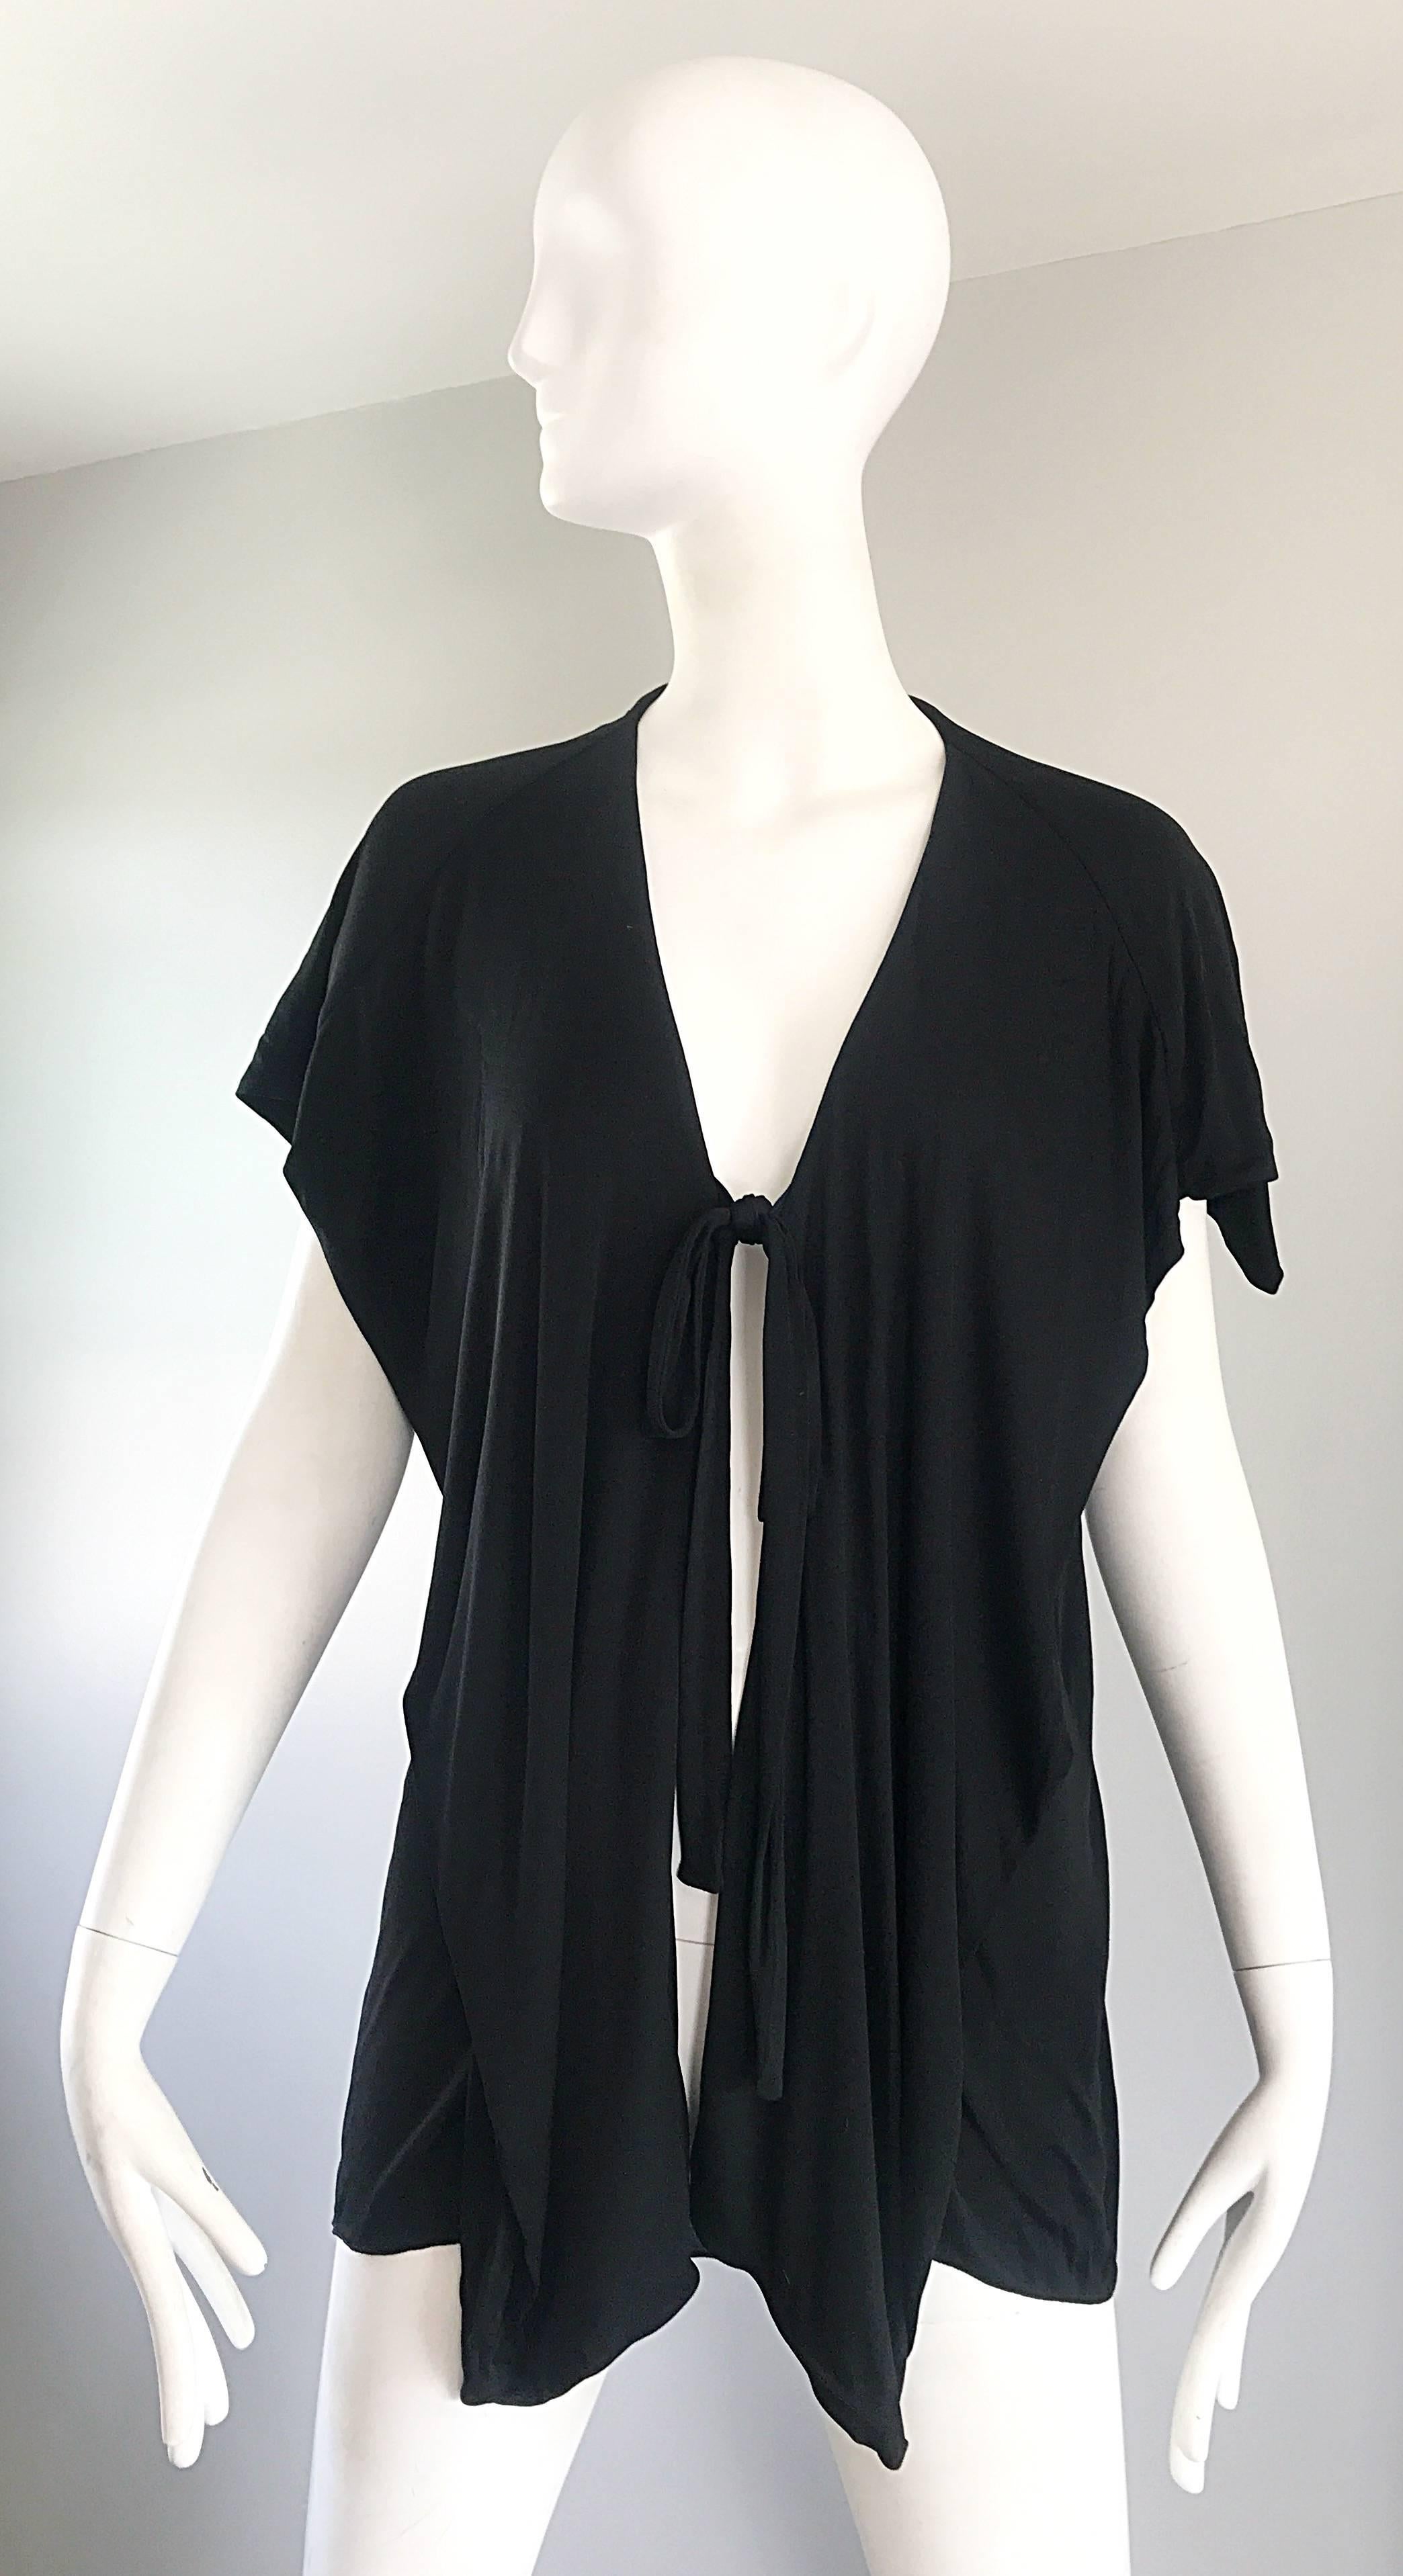 Rare early 70s HOLLY'S HARP early label black silk jersey short dolman sleeve wrap cardigan! Features Harp's signature drapes and gathers throughout. Ties shut at center bust, though could also be left open. The perfect chic everyday 'throw on' that